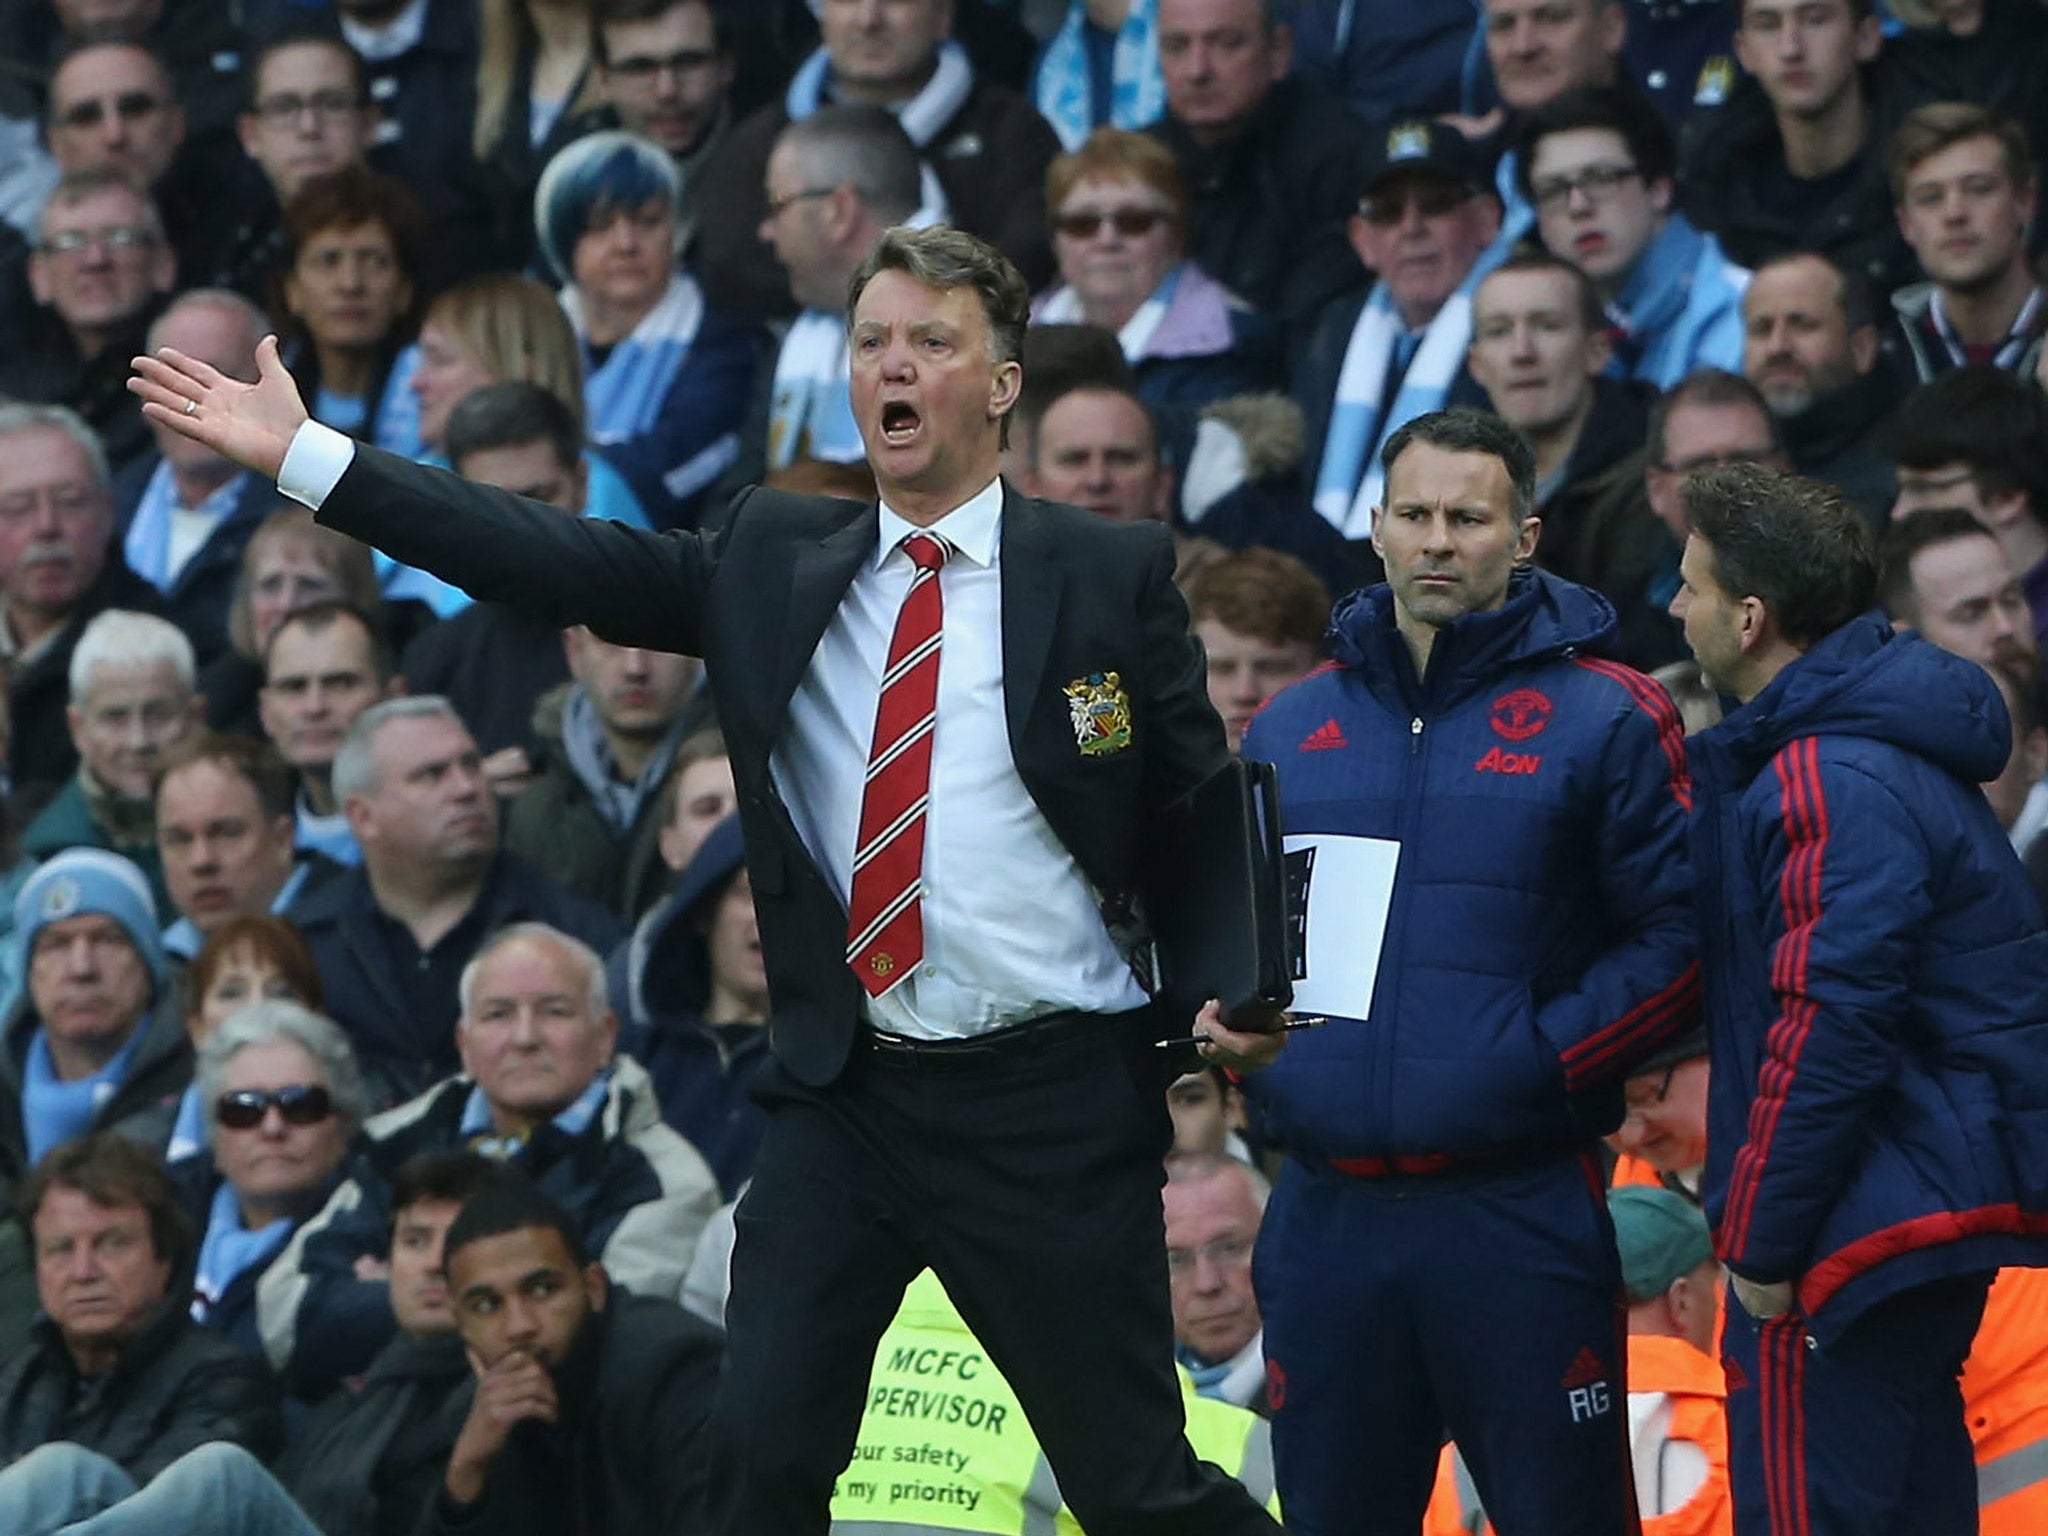 Manchester United manager Louis van Gaal could lose his job even if he secures a top-four finish